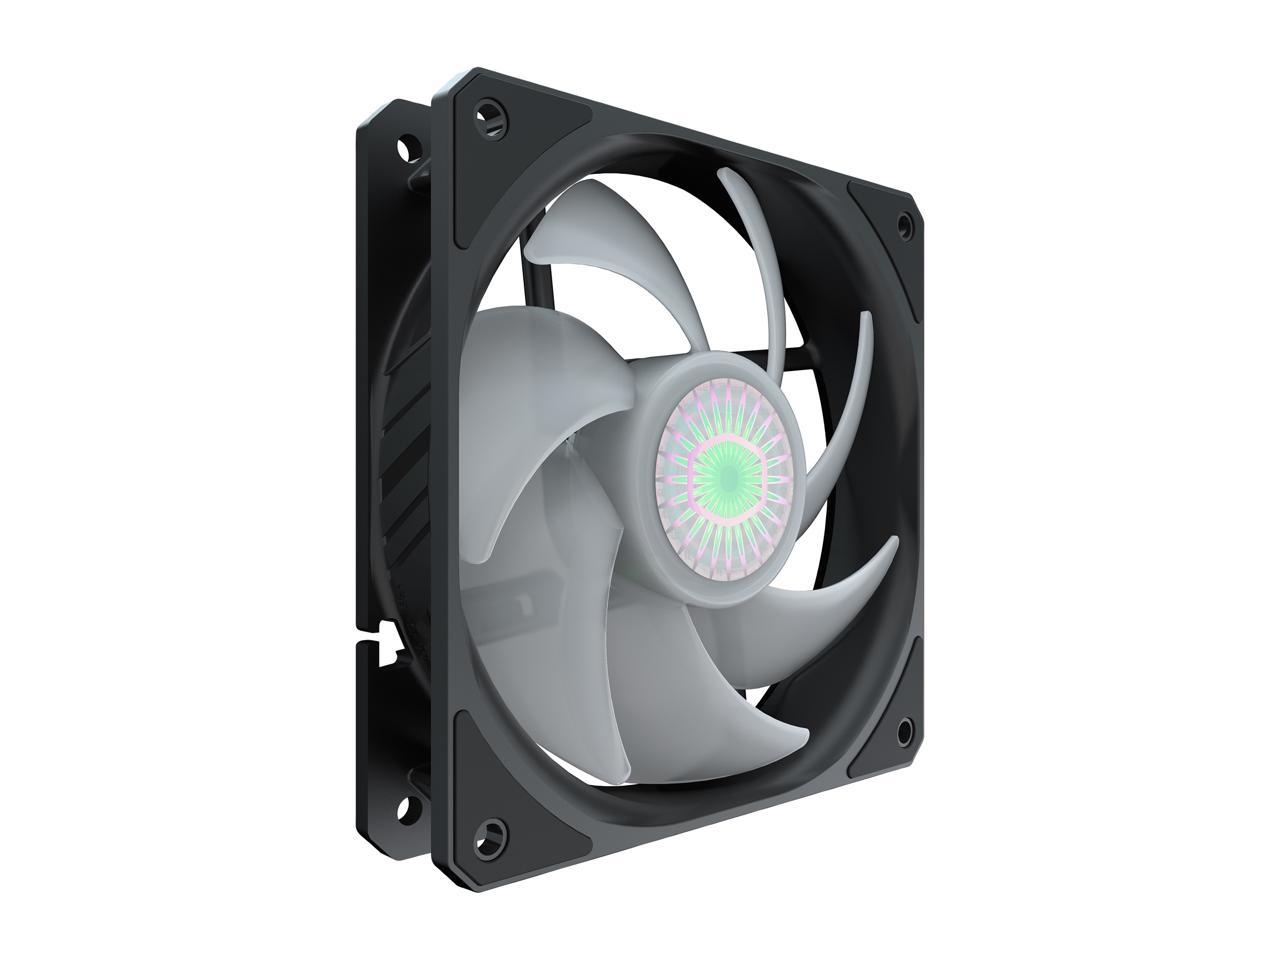 Cooler Master SickleFlow 120 V2 RGB Square Frame Fan with Customizable LEDS, Air Balance Curve Blade Design, Sealed Bearing, PWM Control for Computer Case & Liquid Radiator